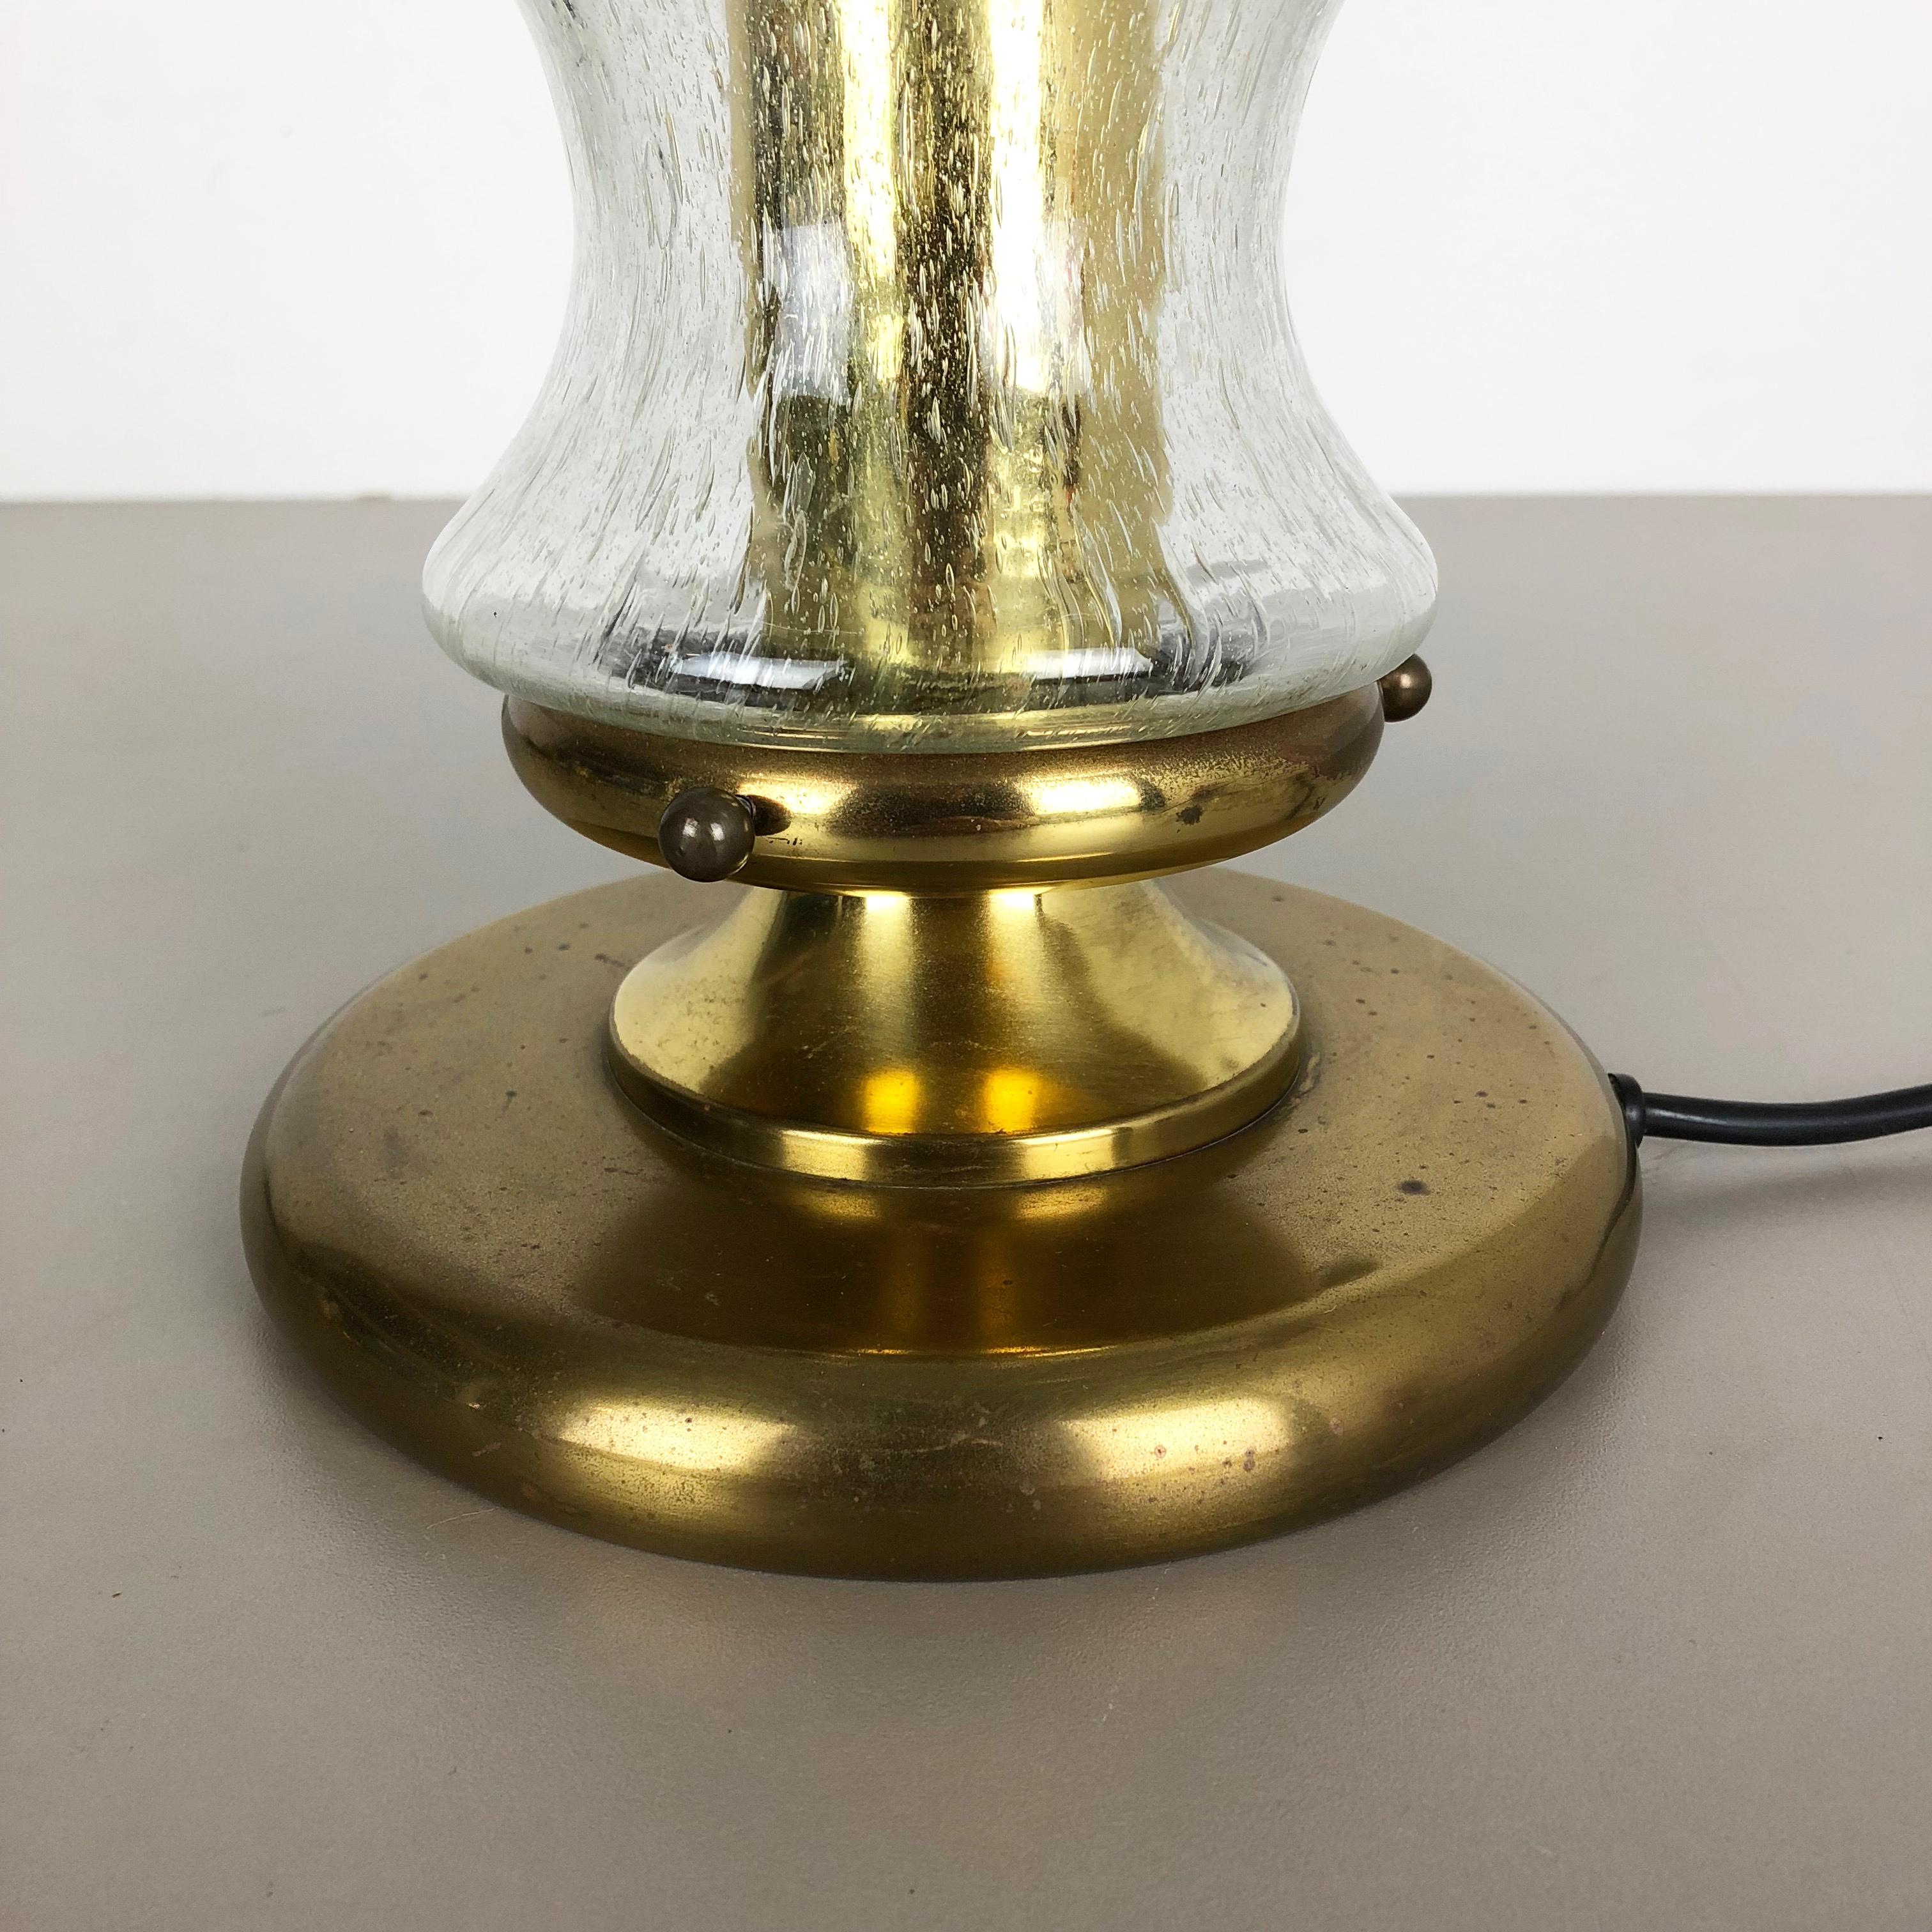 Modernist Glass and Brass Mushroom Table Light by Doria Lights, 1970s, Germany In Good Condition For Sale In Kirchlengern, DE